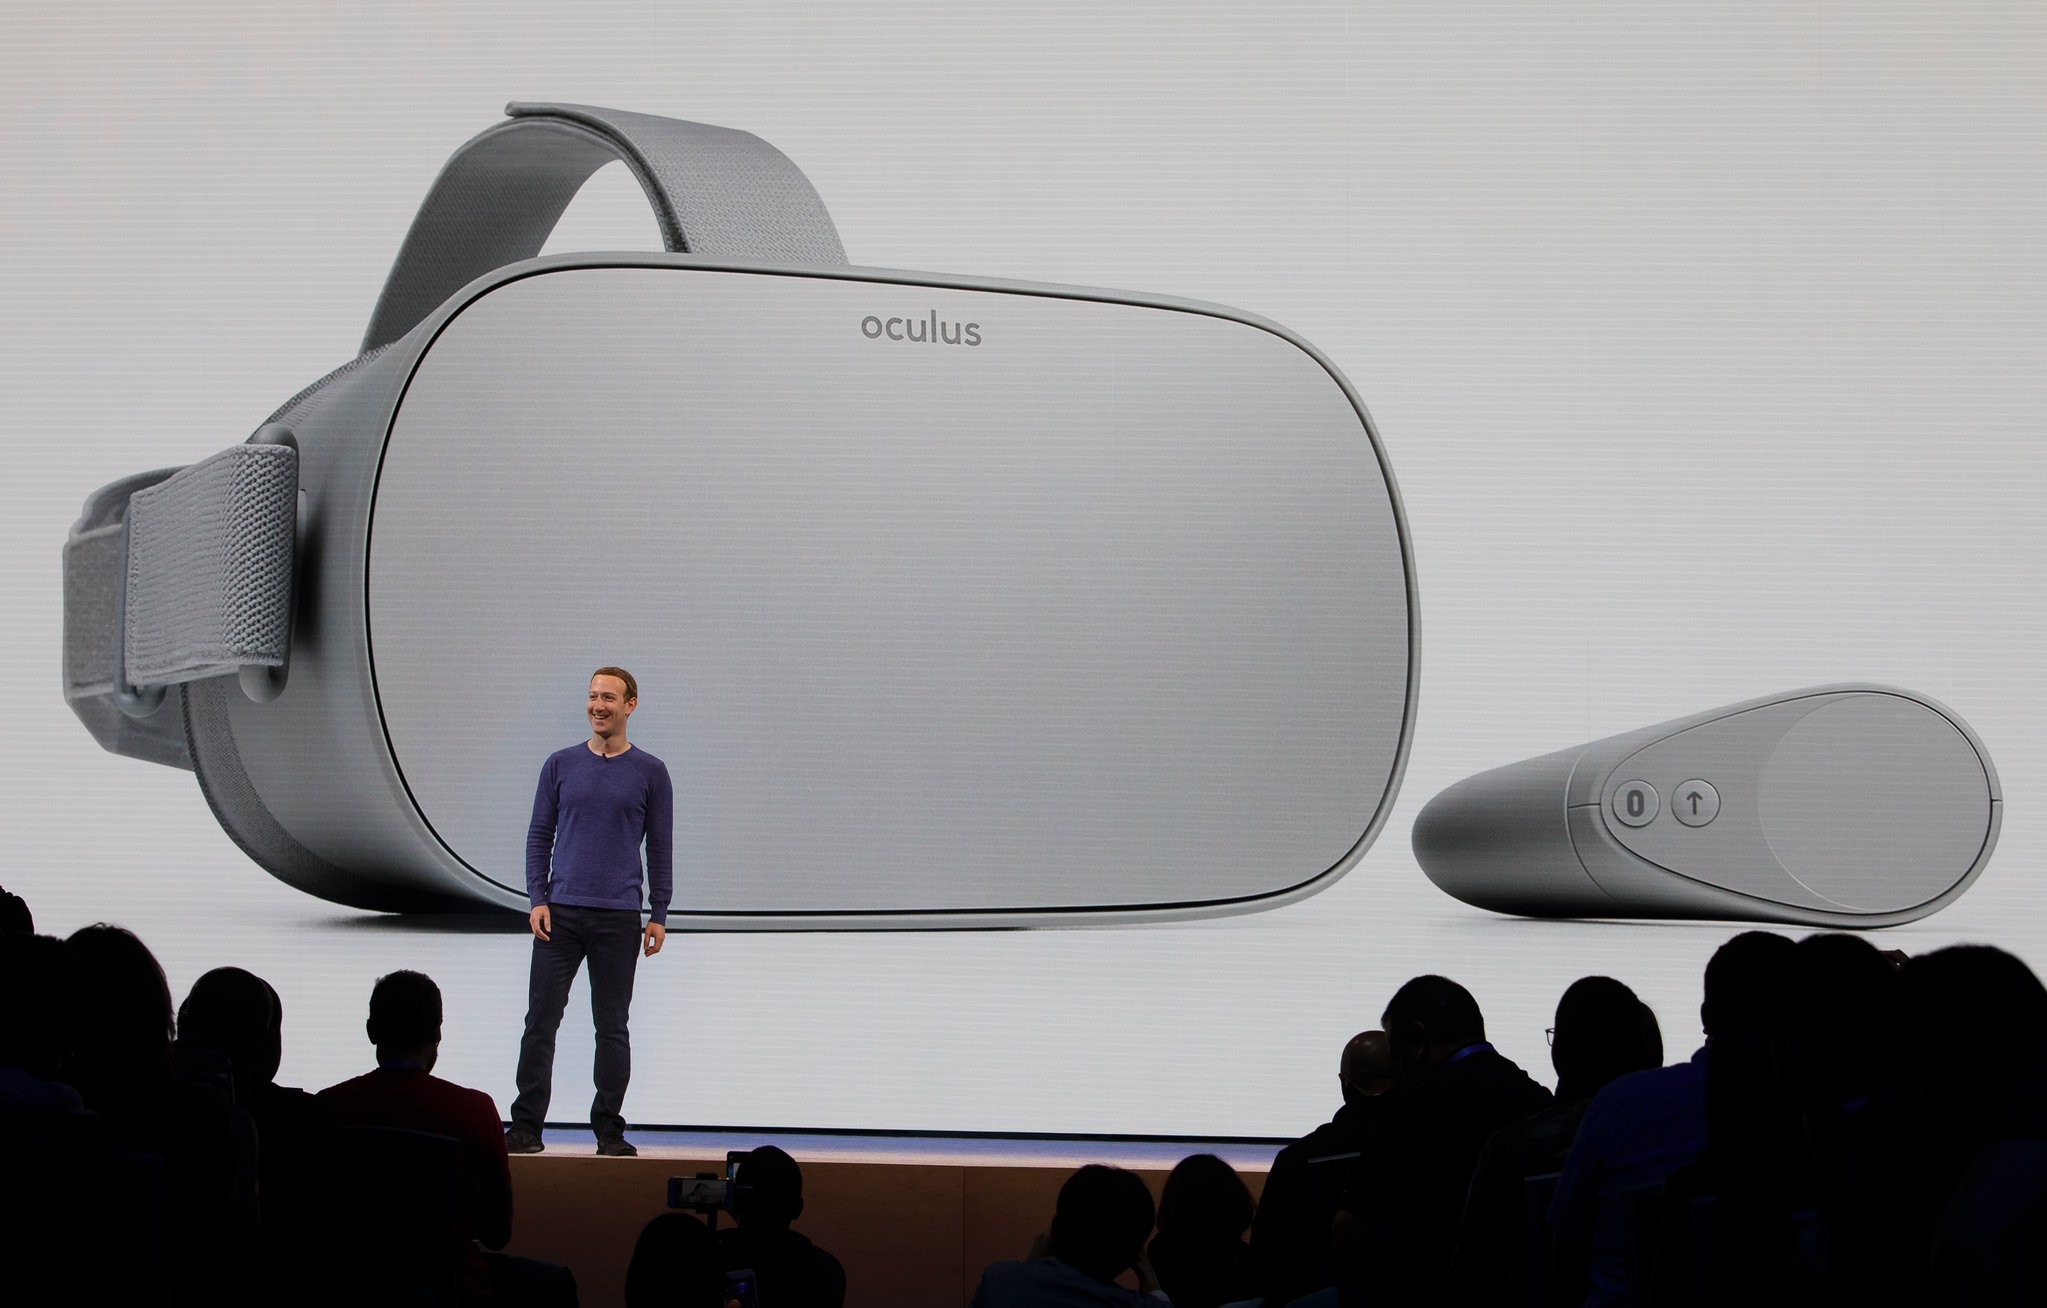 Facebook Oculus Go Standalone VR Headset Launched for $199 and Up - CNX